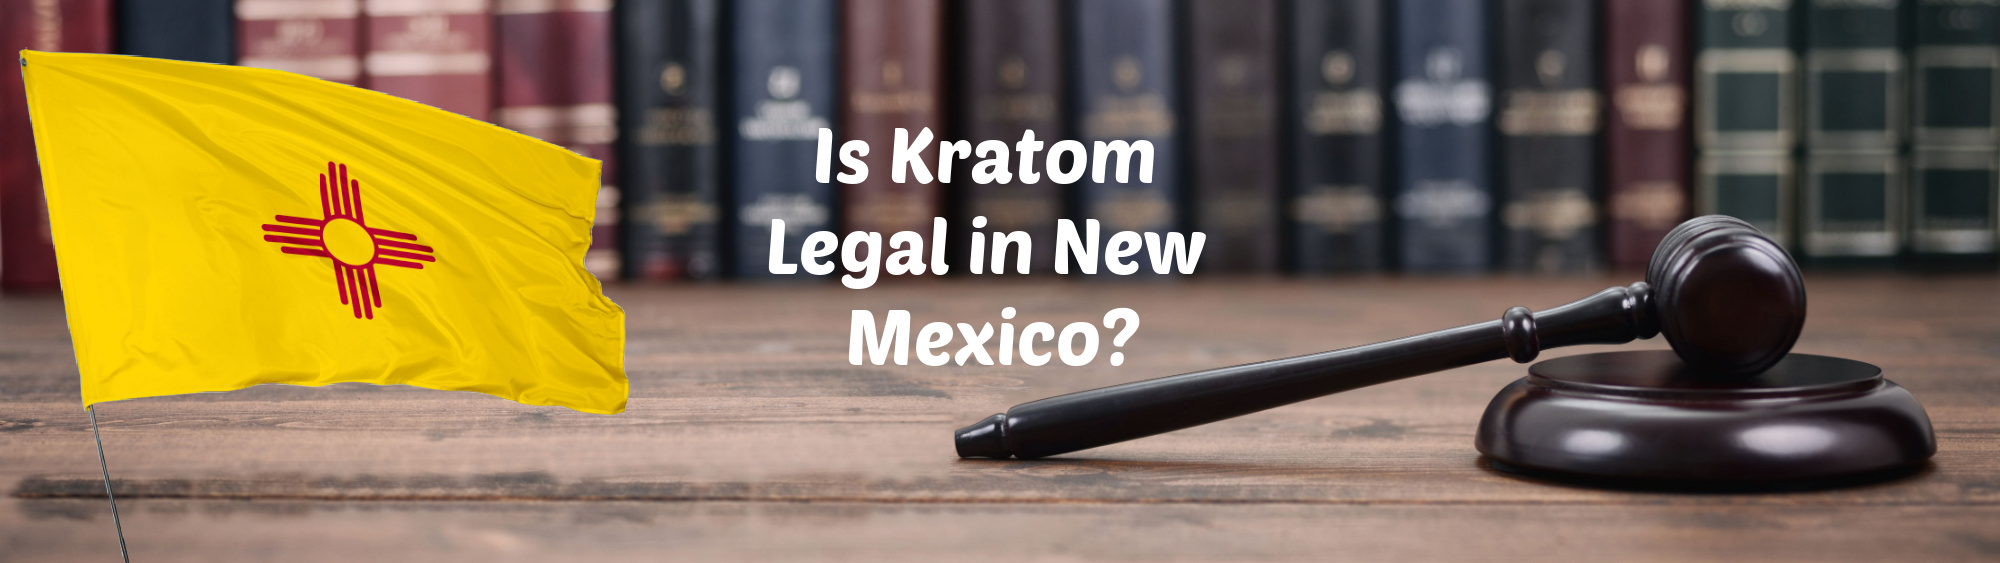 image of is kratom legal in new mexico